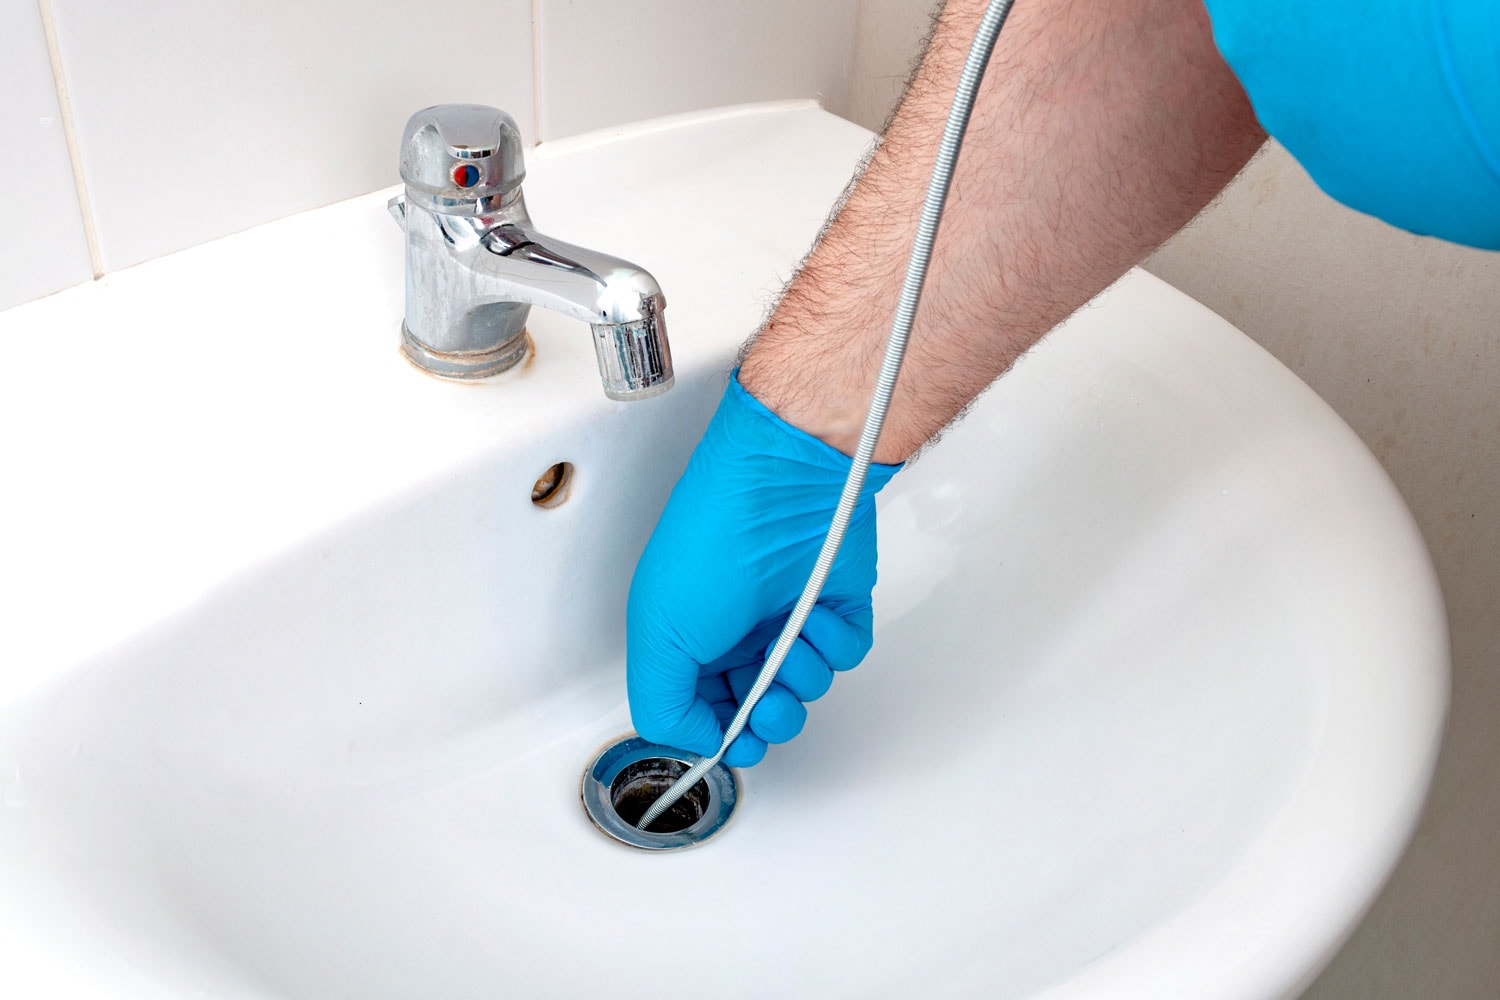 Inserting a plumbing snake to the drain to check for clogging